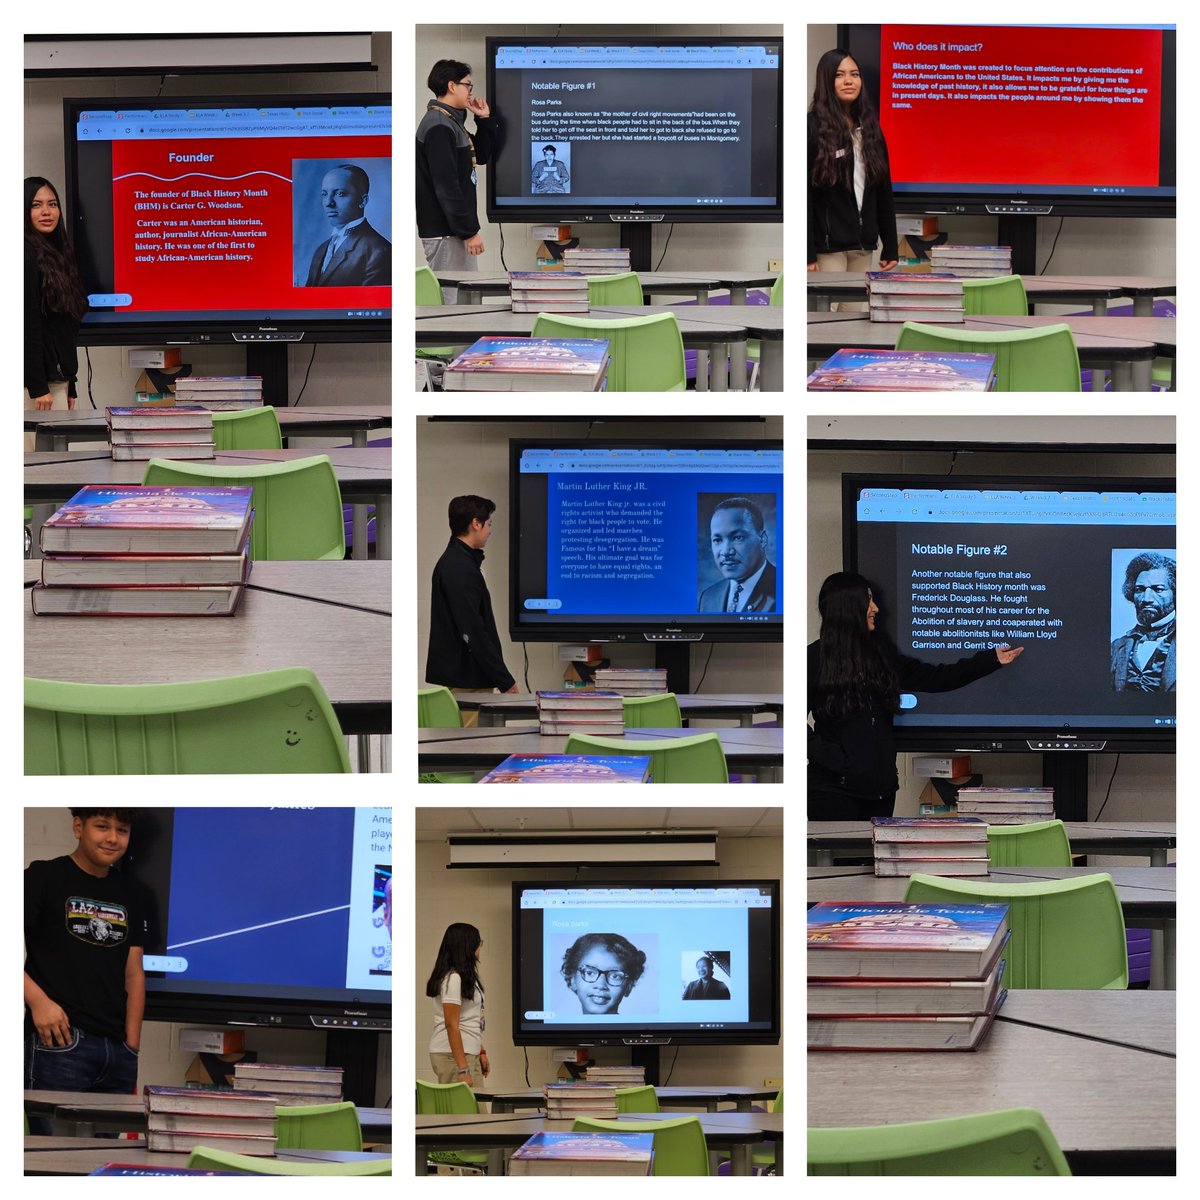 It was thrilling to see my @STAGinPG students wrapping up #BlackHistoryMonth earlier this week with insightful presentations on the founder of Black History Month, its impact, and notable figures! @DrReyC @Dr_Delgado1